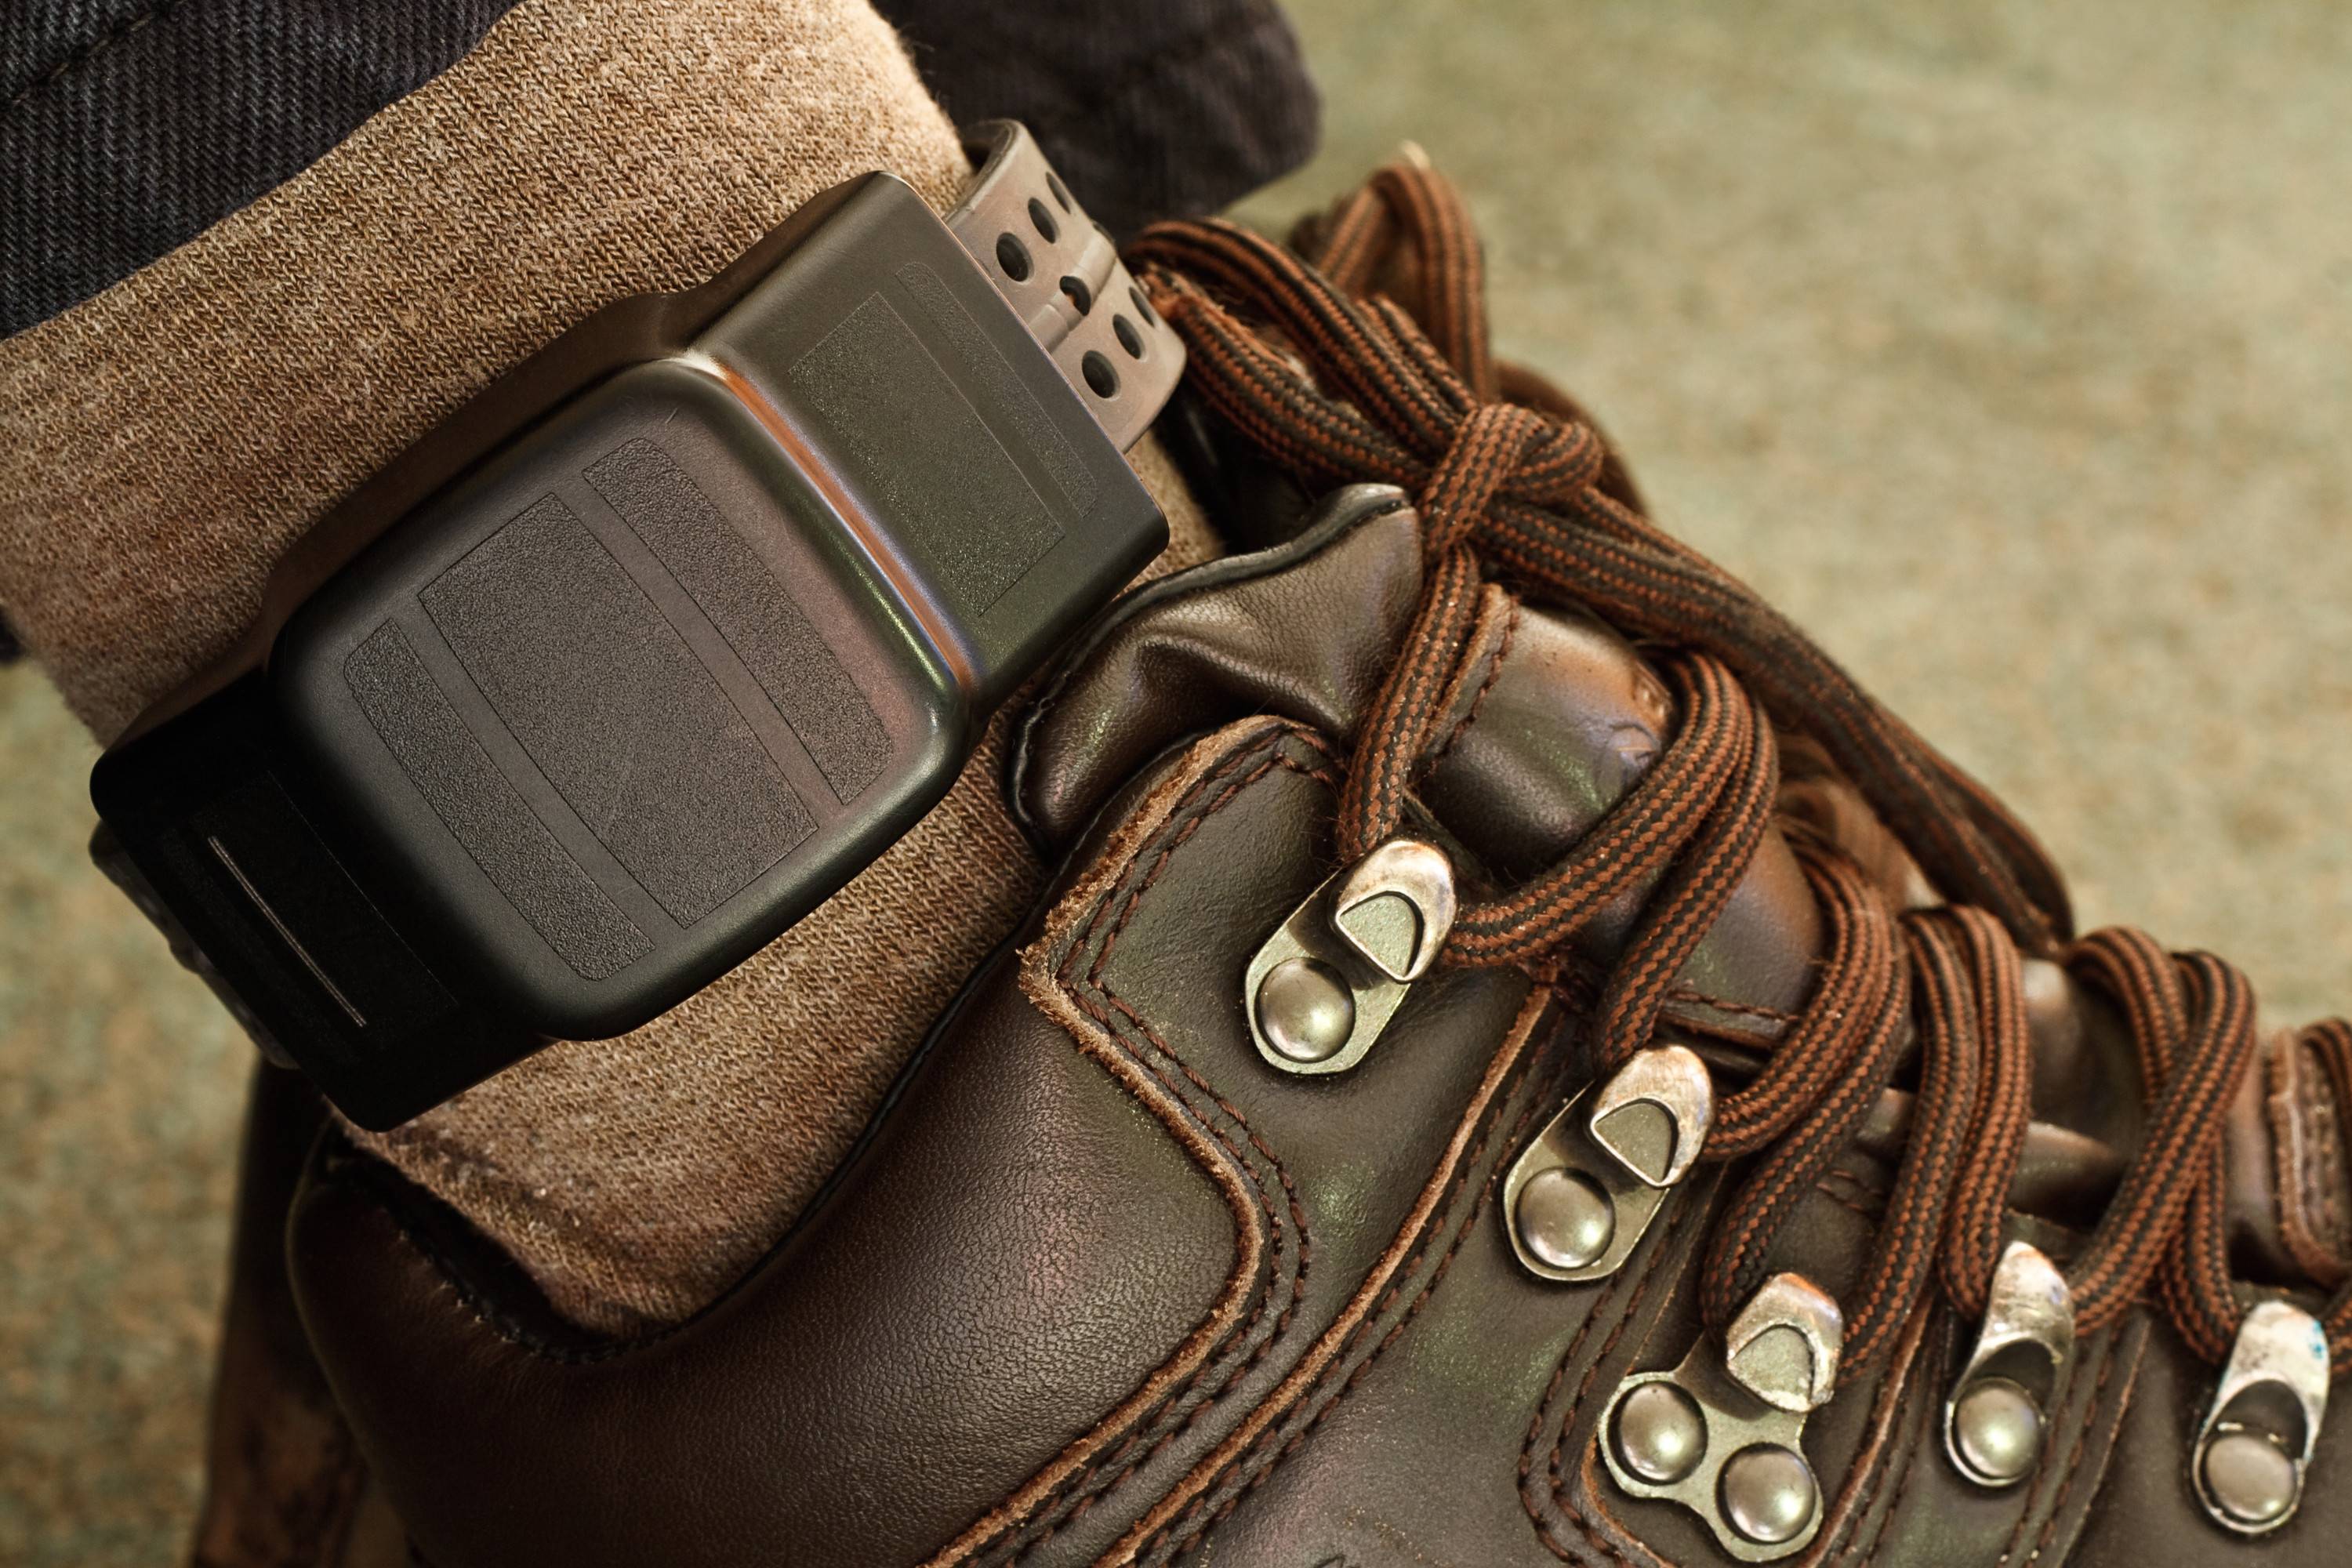 Catholic school gives student the boot over court-ordered ankle monitor